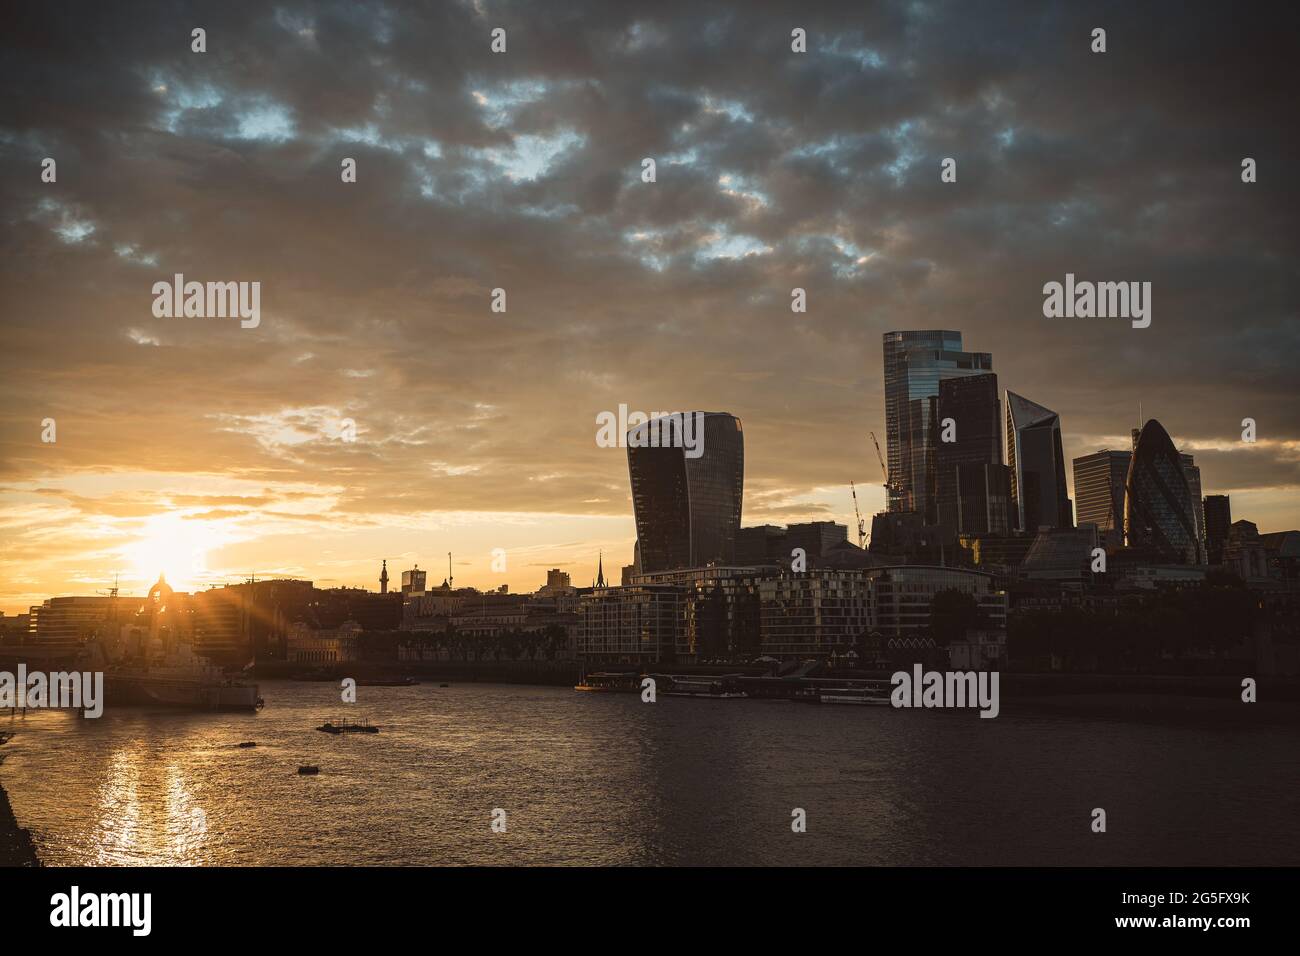 Thames River Embankment, London | UK - 2021.06.26: The view of the CIty Business District from the thames river on beautiful sunset evening Stock Photo